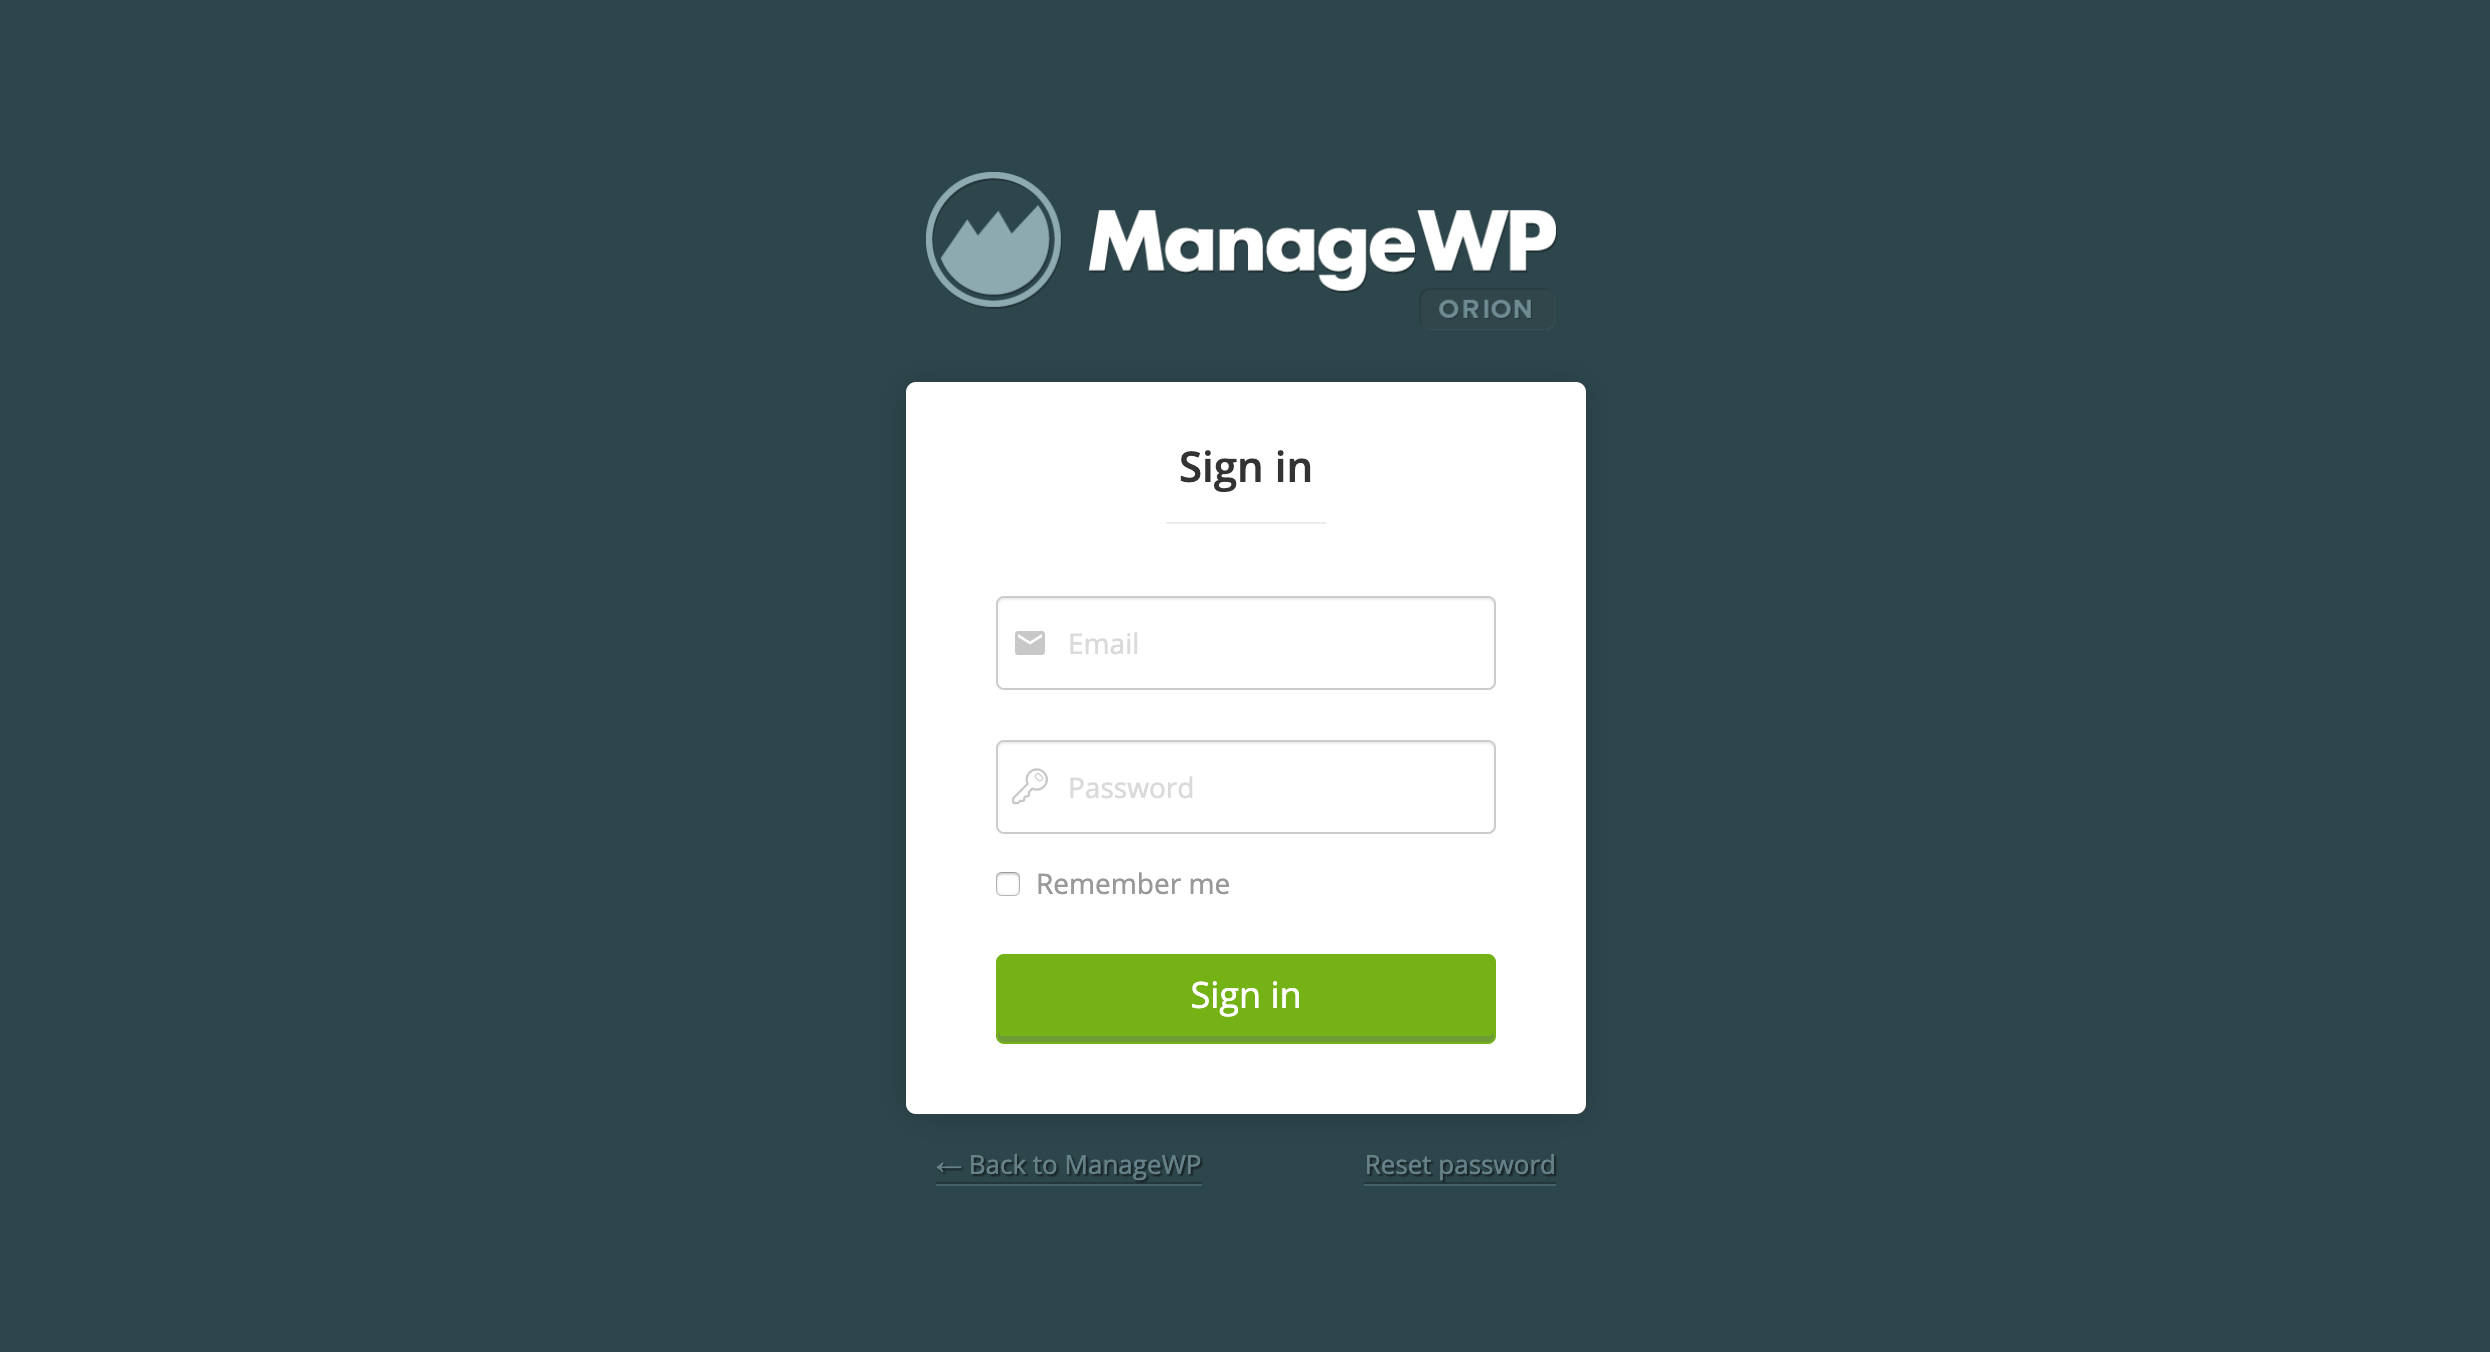 Signing in to ManageWP.